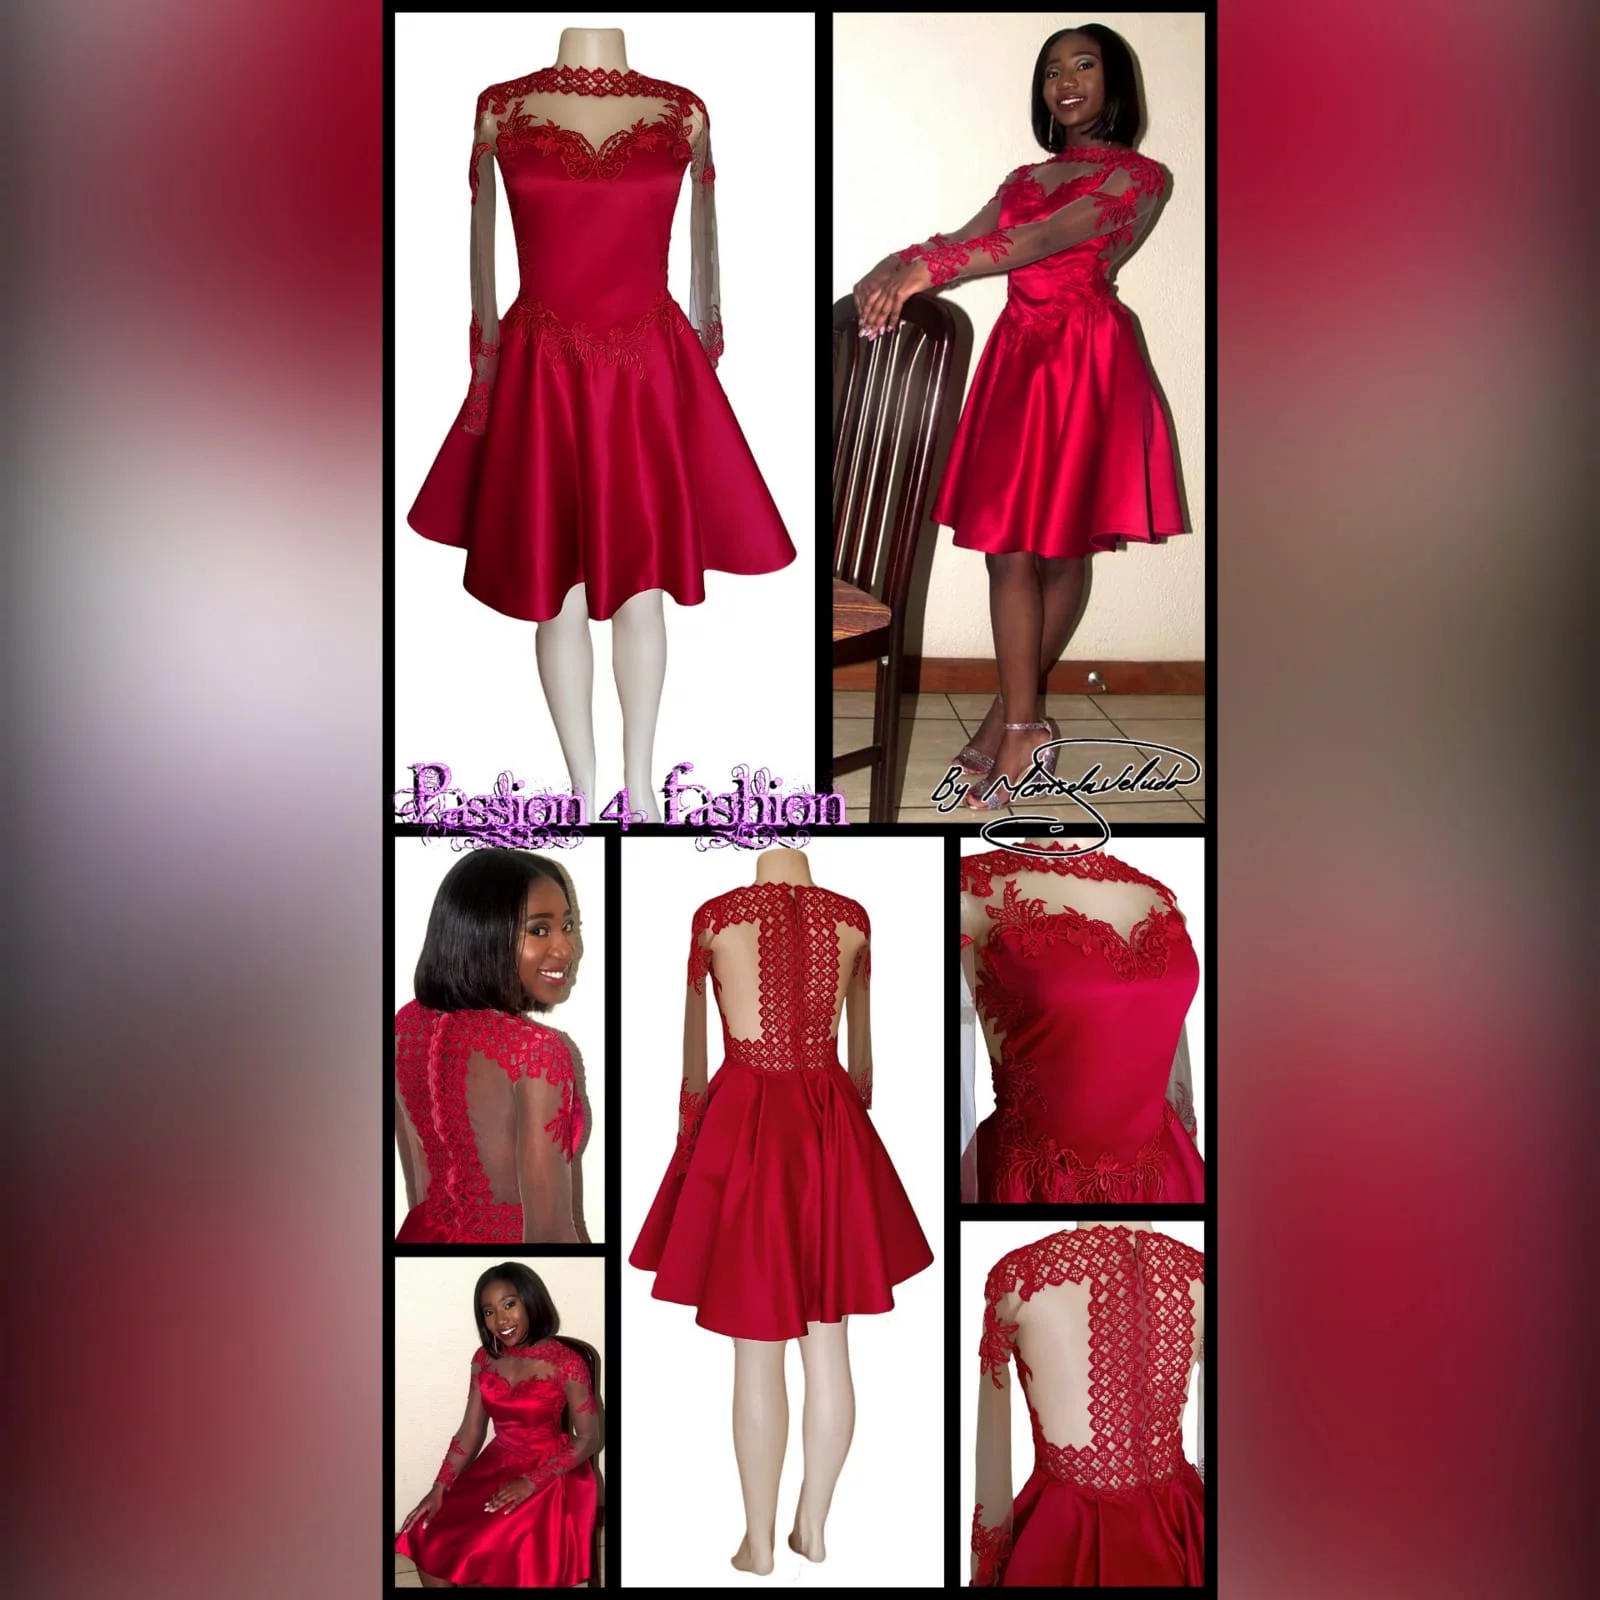 Red short satin prom dress 3 red short satin prom dress with an illusion neckline detailed with lace, long illusion lace sleeves. Illusion back detailed with lace.